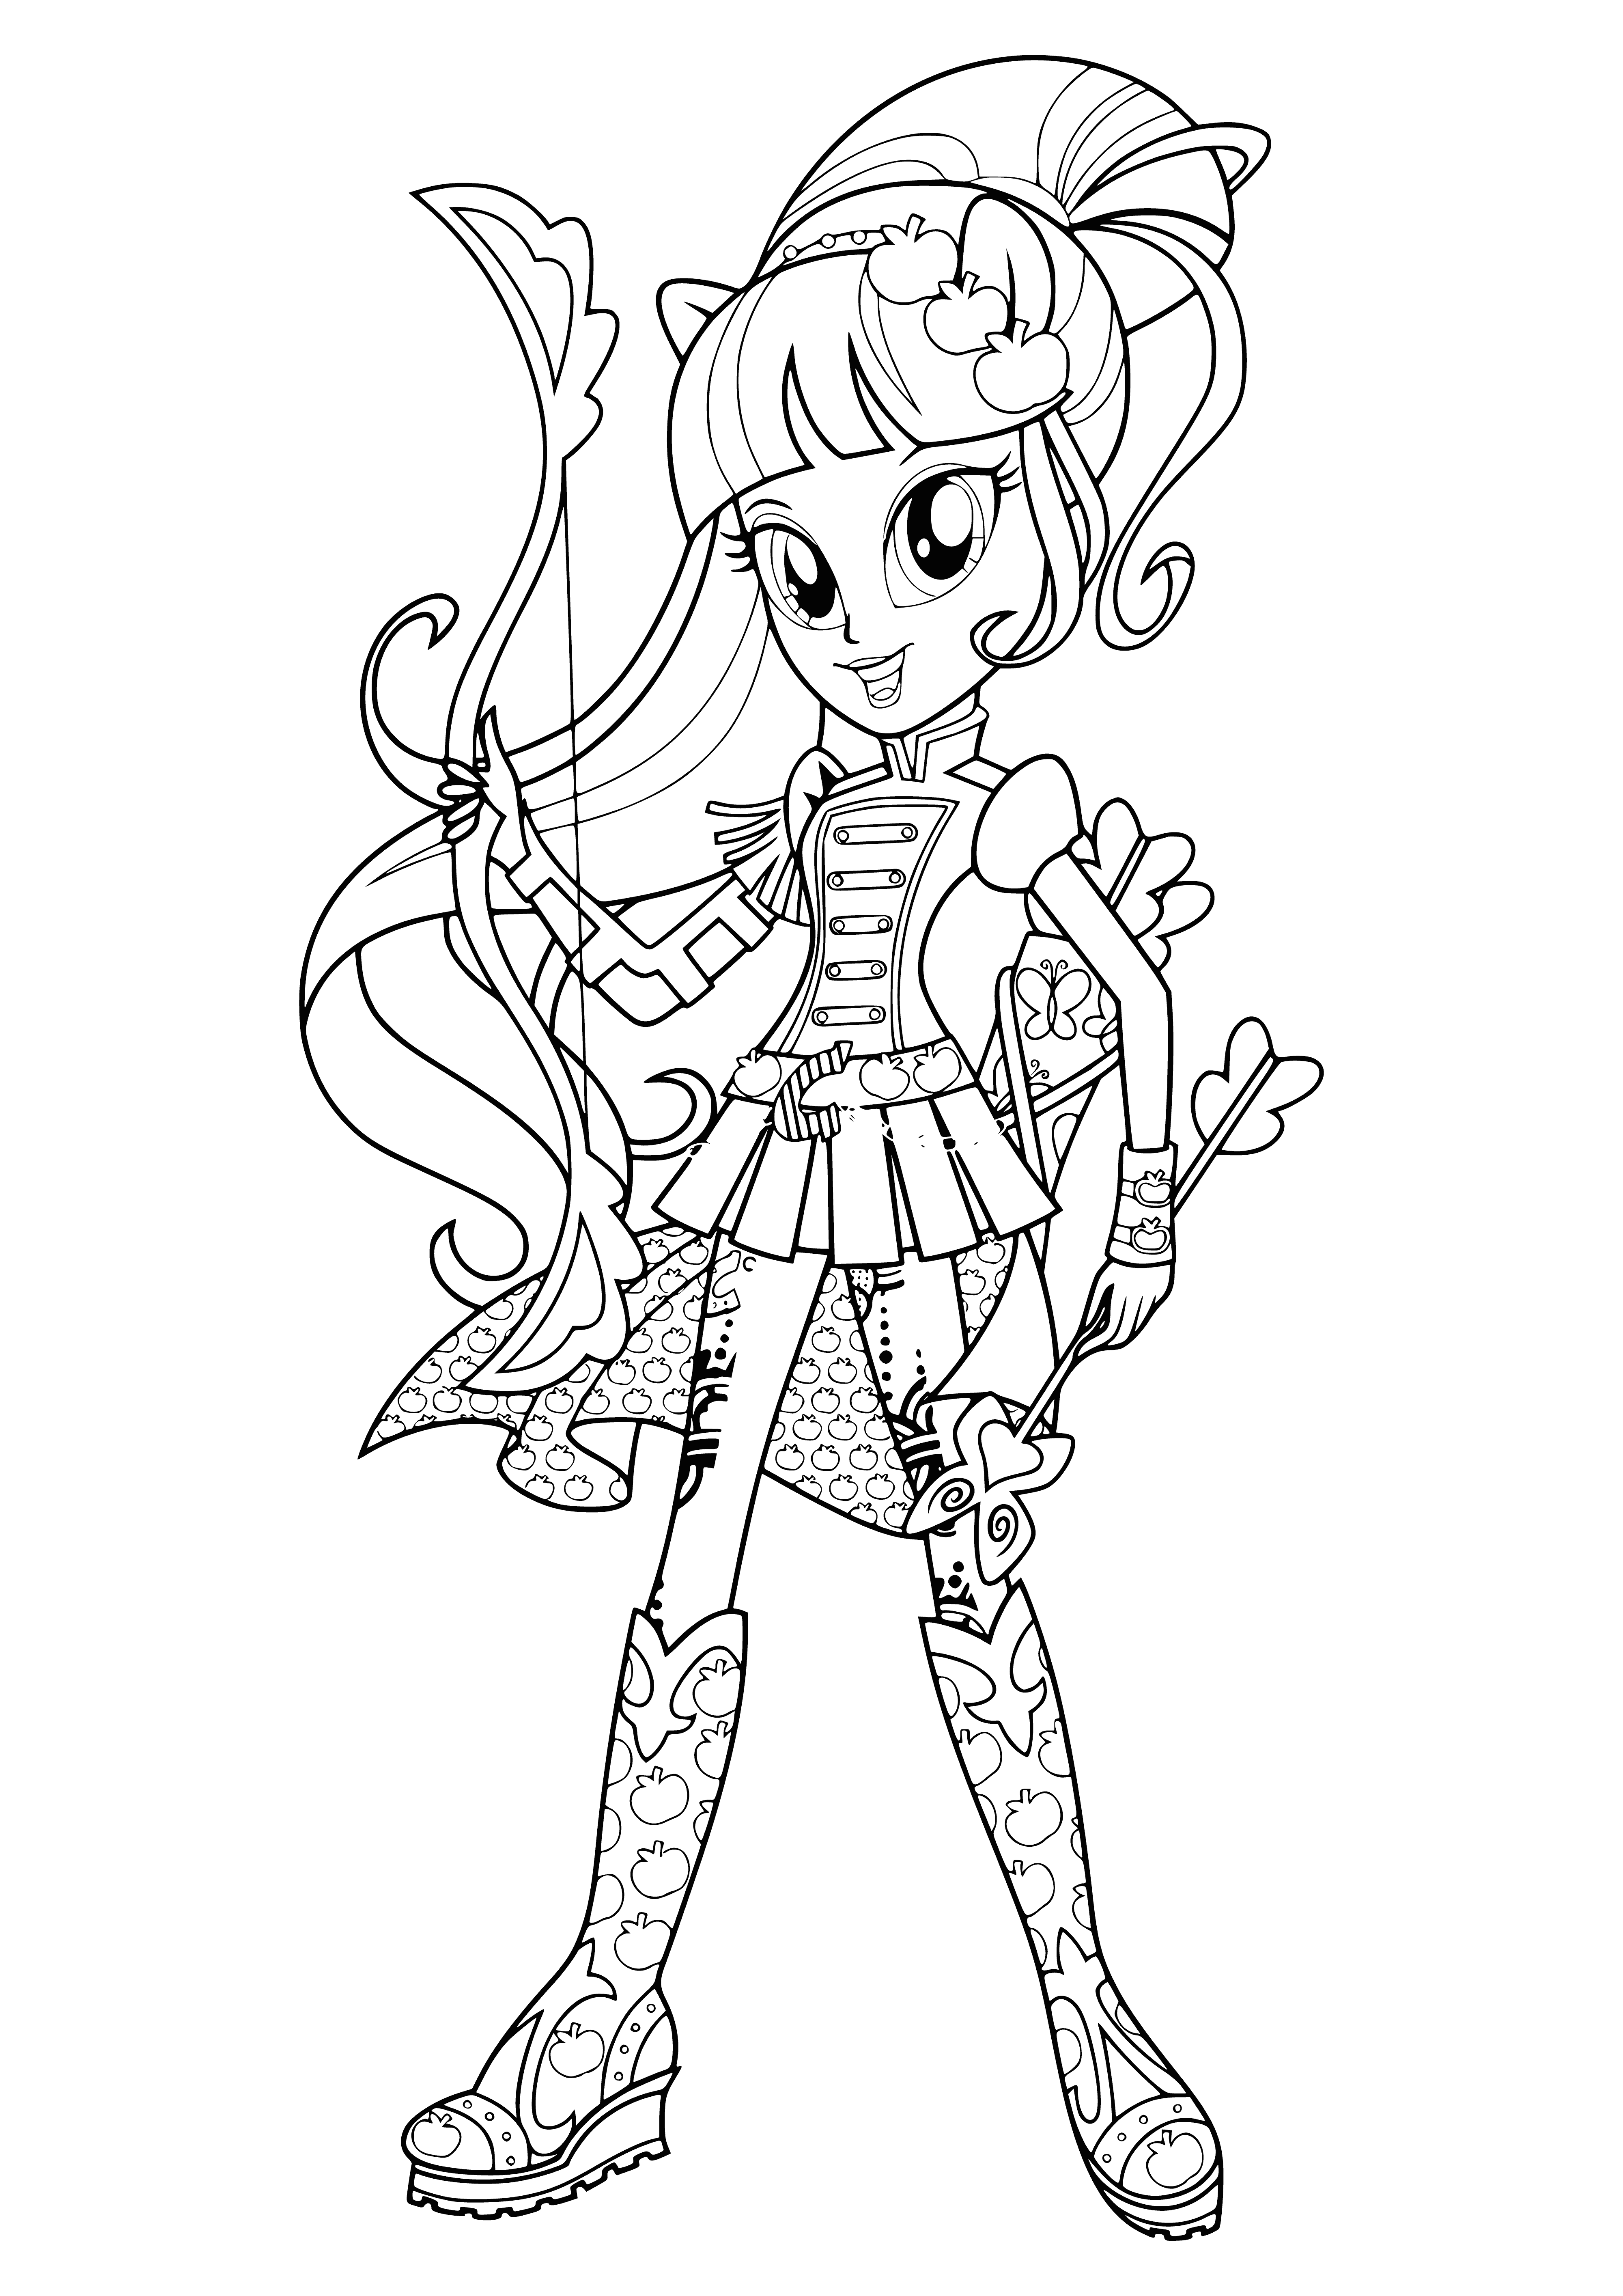 coloring page: Applejack Archer uses archery skills to help others w/ Equestria Girls and her horse Arrow by her side. #friendship #archery #adventure